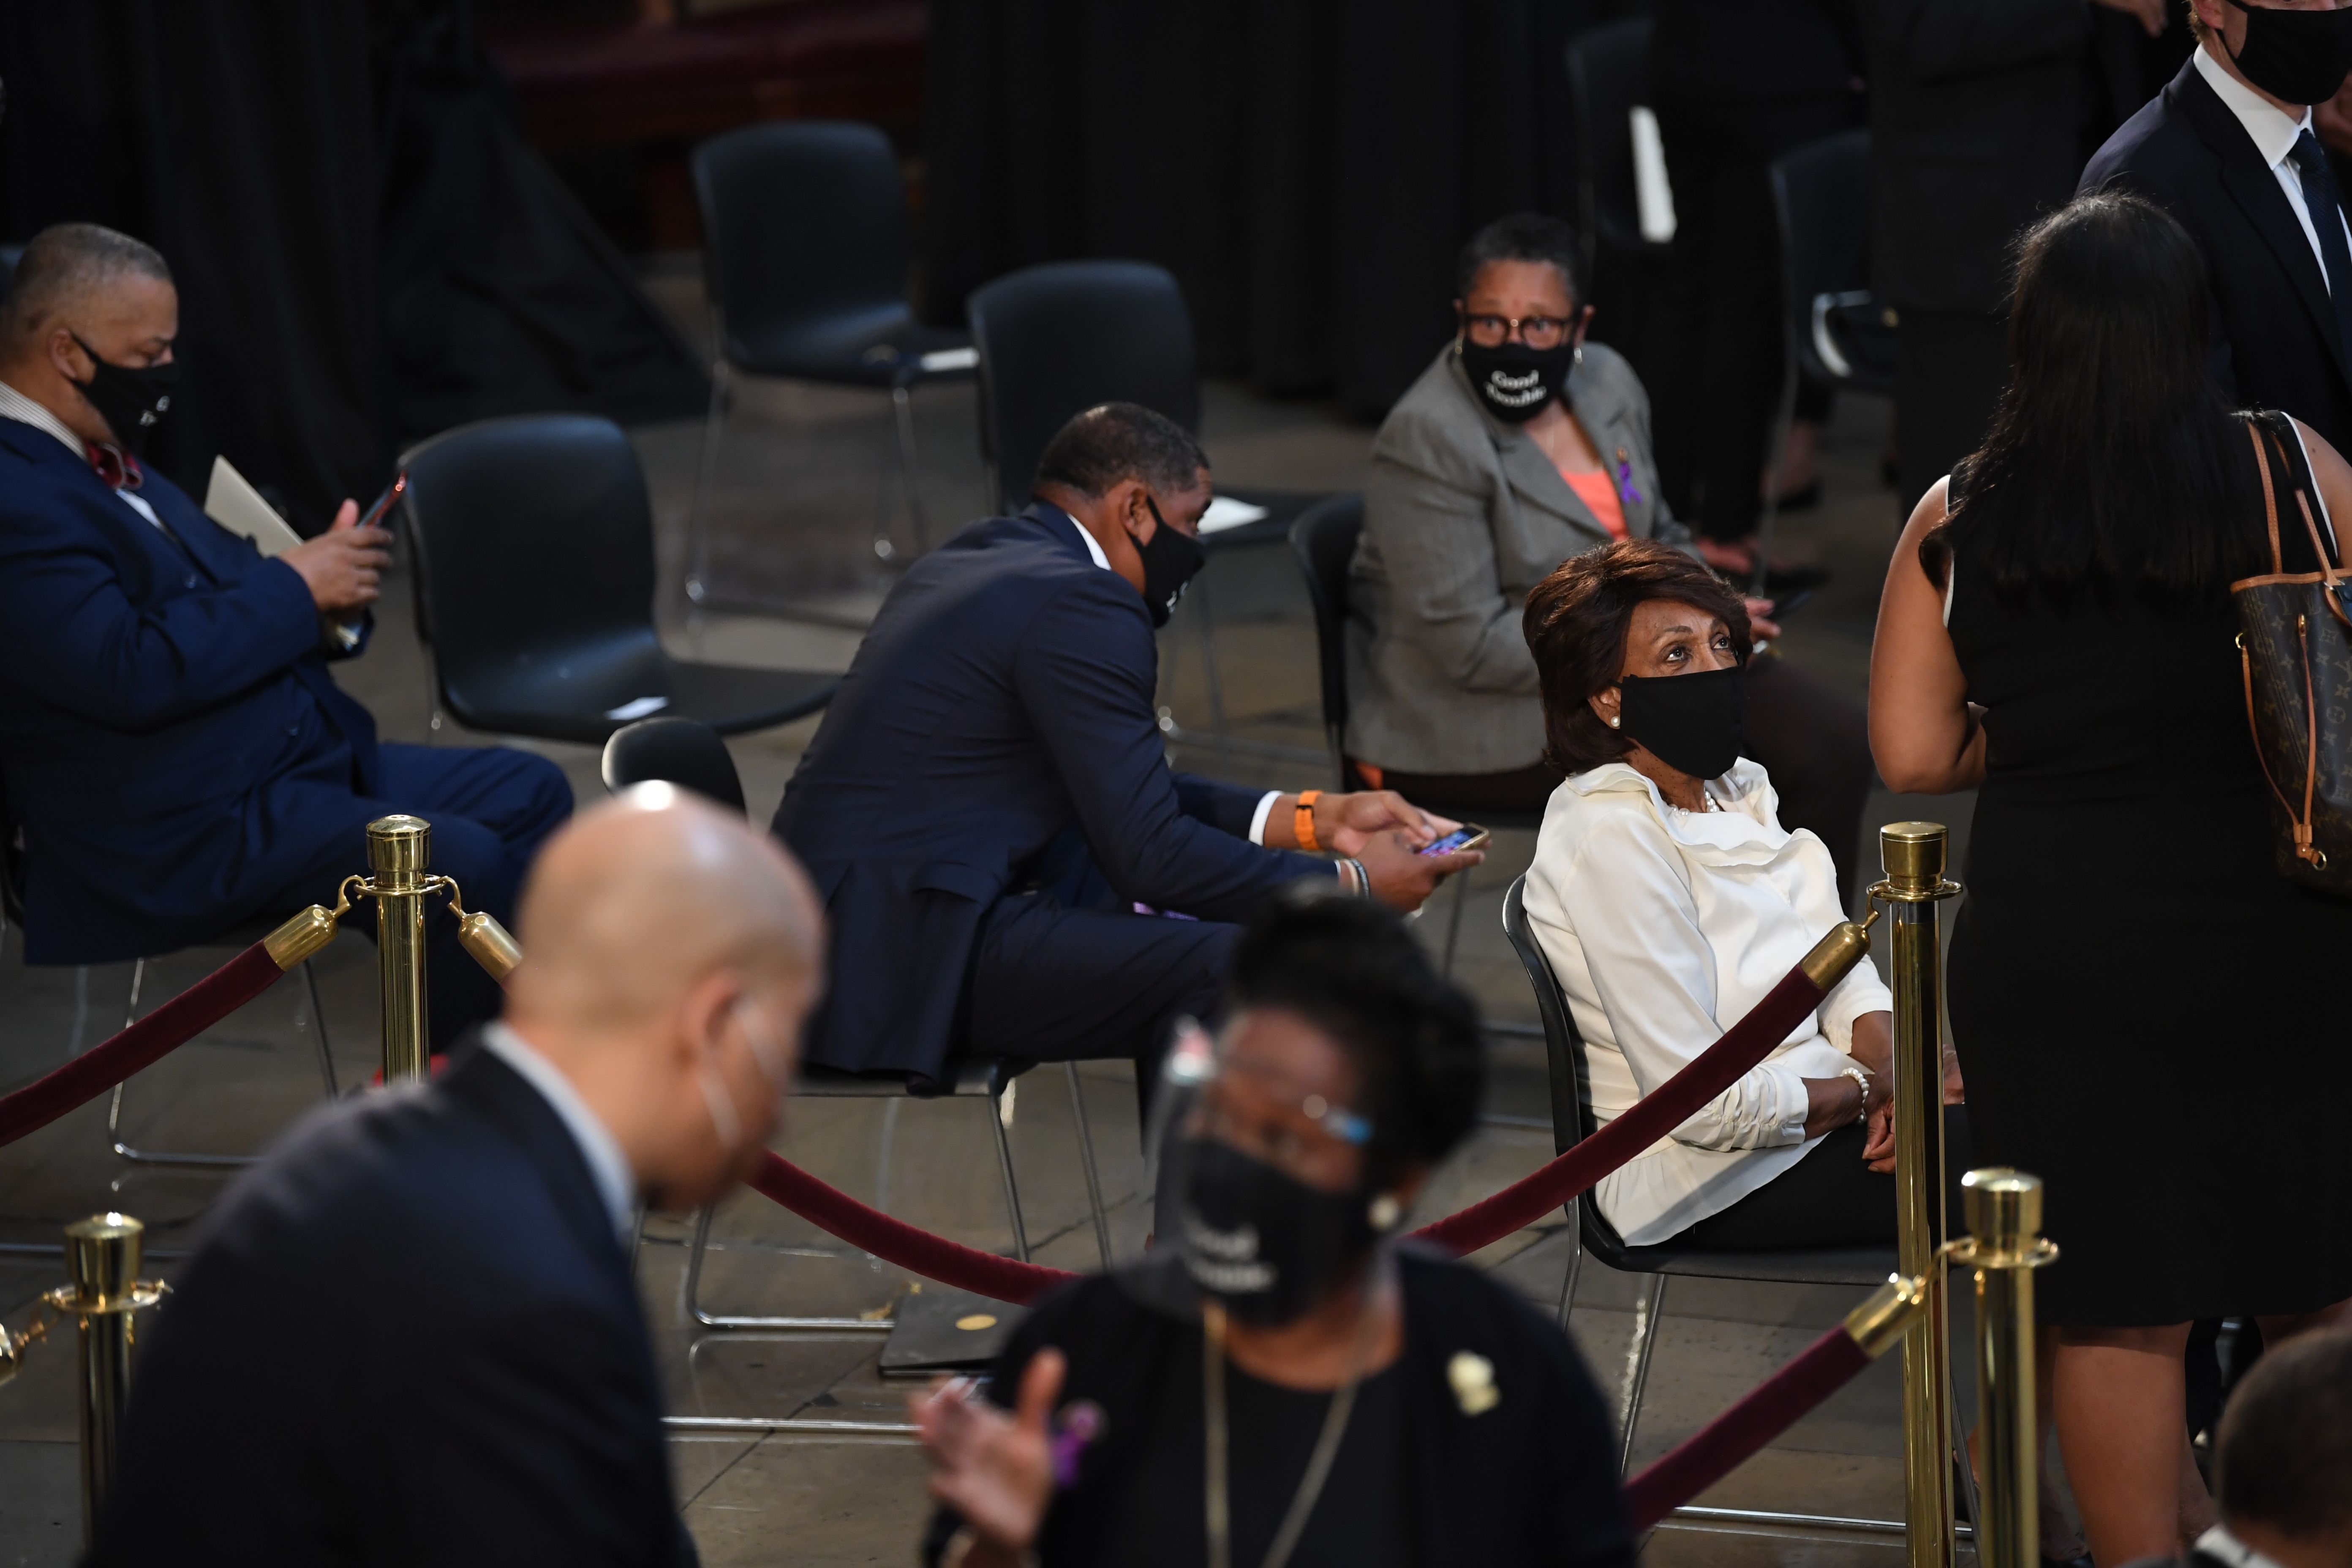 California Rep. Maxine Waters waits prior to the start of the ceremony preceding the lying in state of Rep. John Lewis in the Rotunda of the US Capitol in Washington, DC.